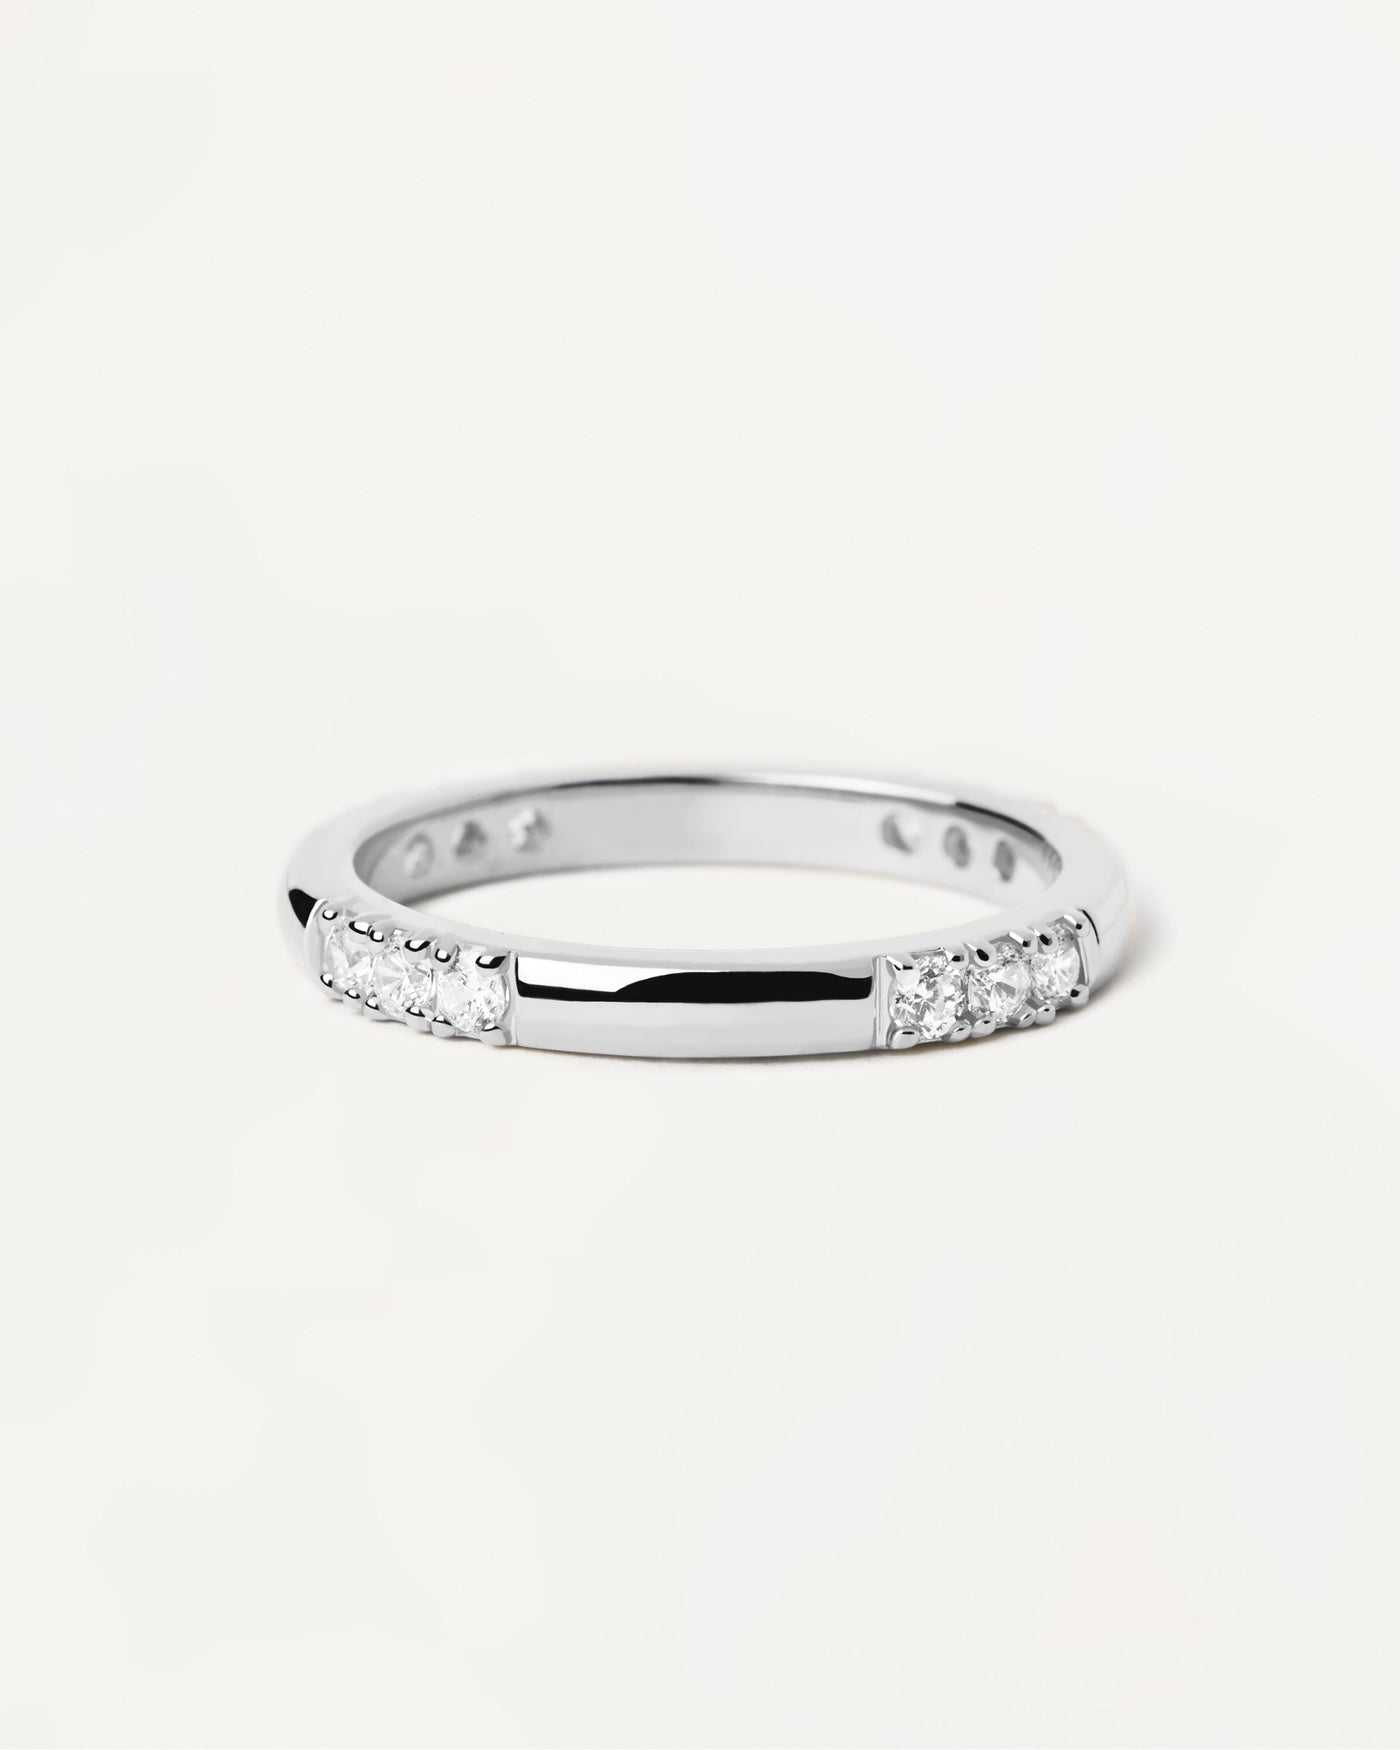 2023 Selection | Fabi Silver Ring. Elegant sterling silver ring with white zirconia. Get the latest arrival from PDPAOLA. Place your order safely and get this Best Seller. Free Shipping.